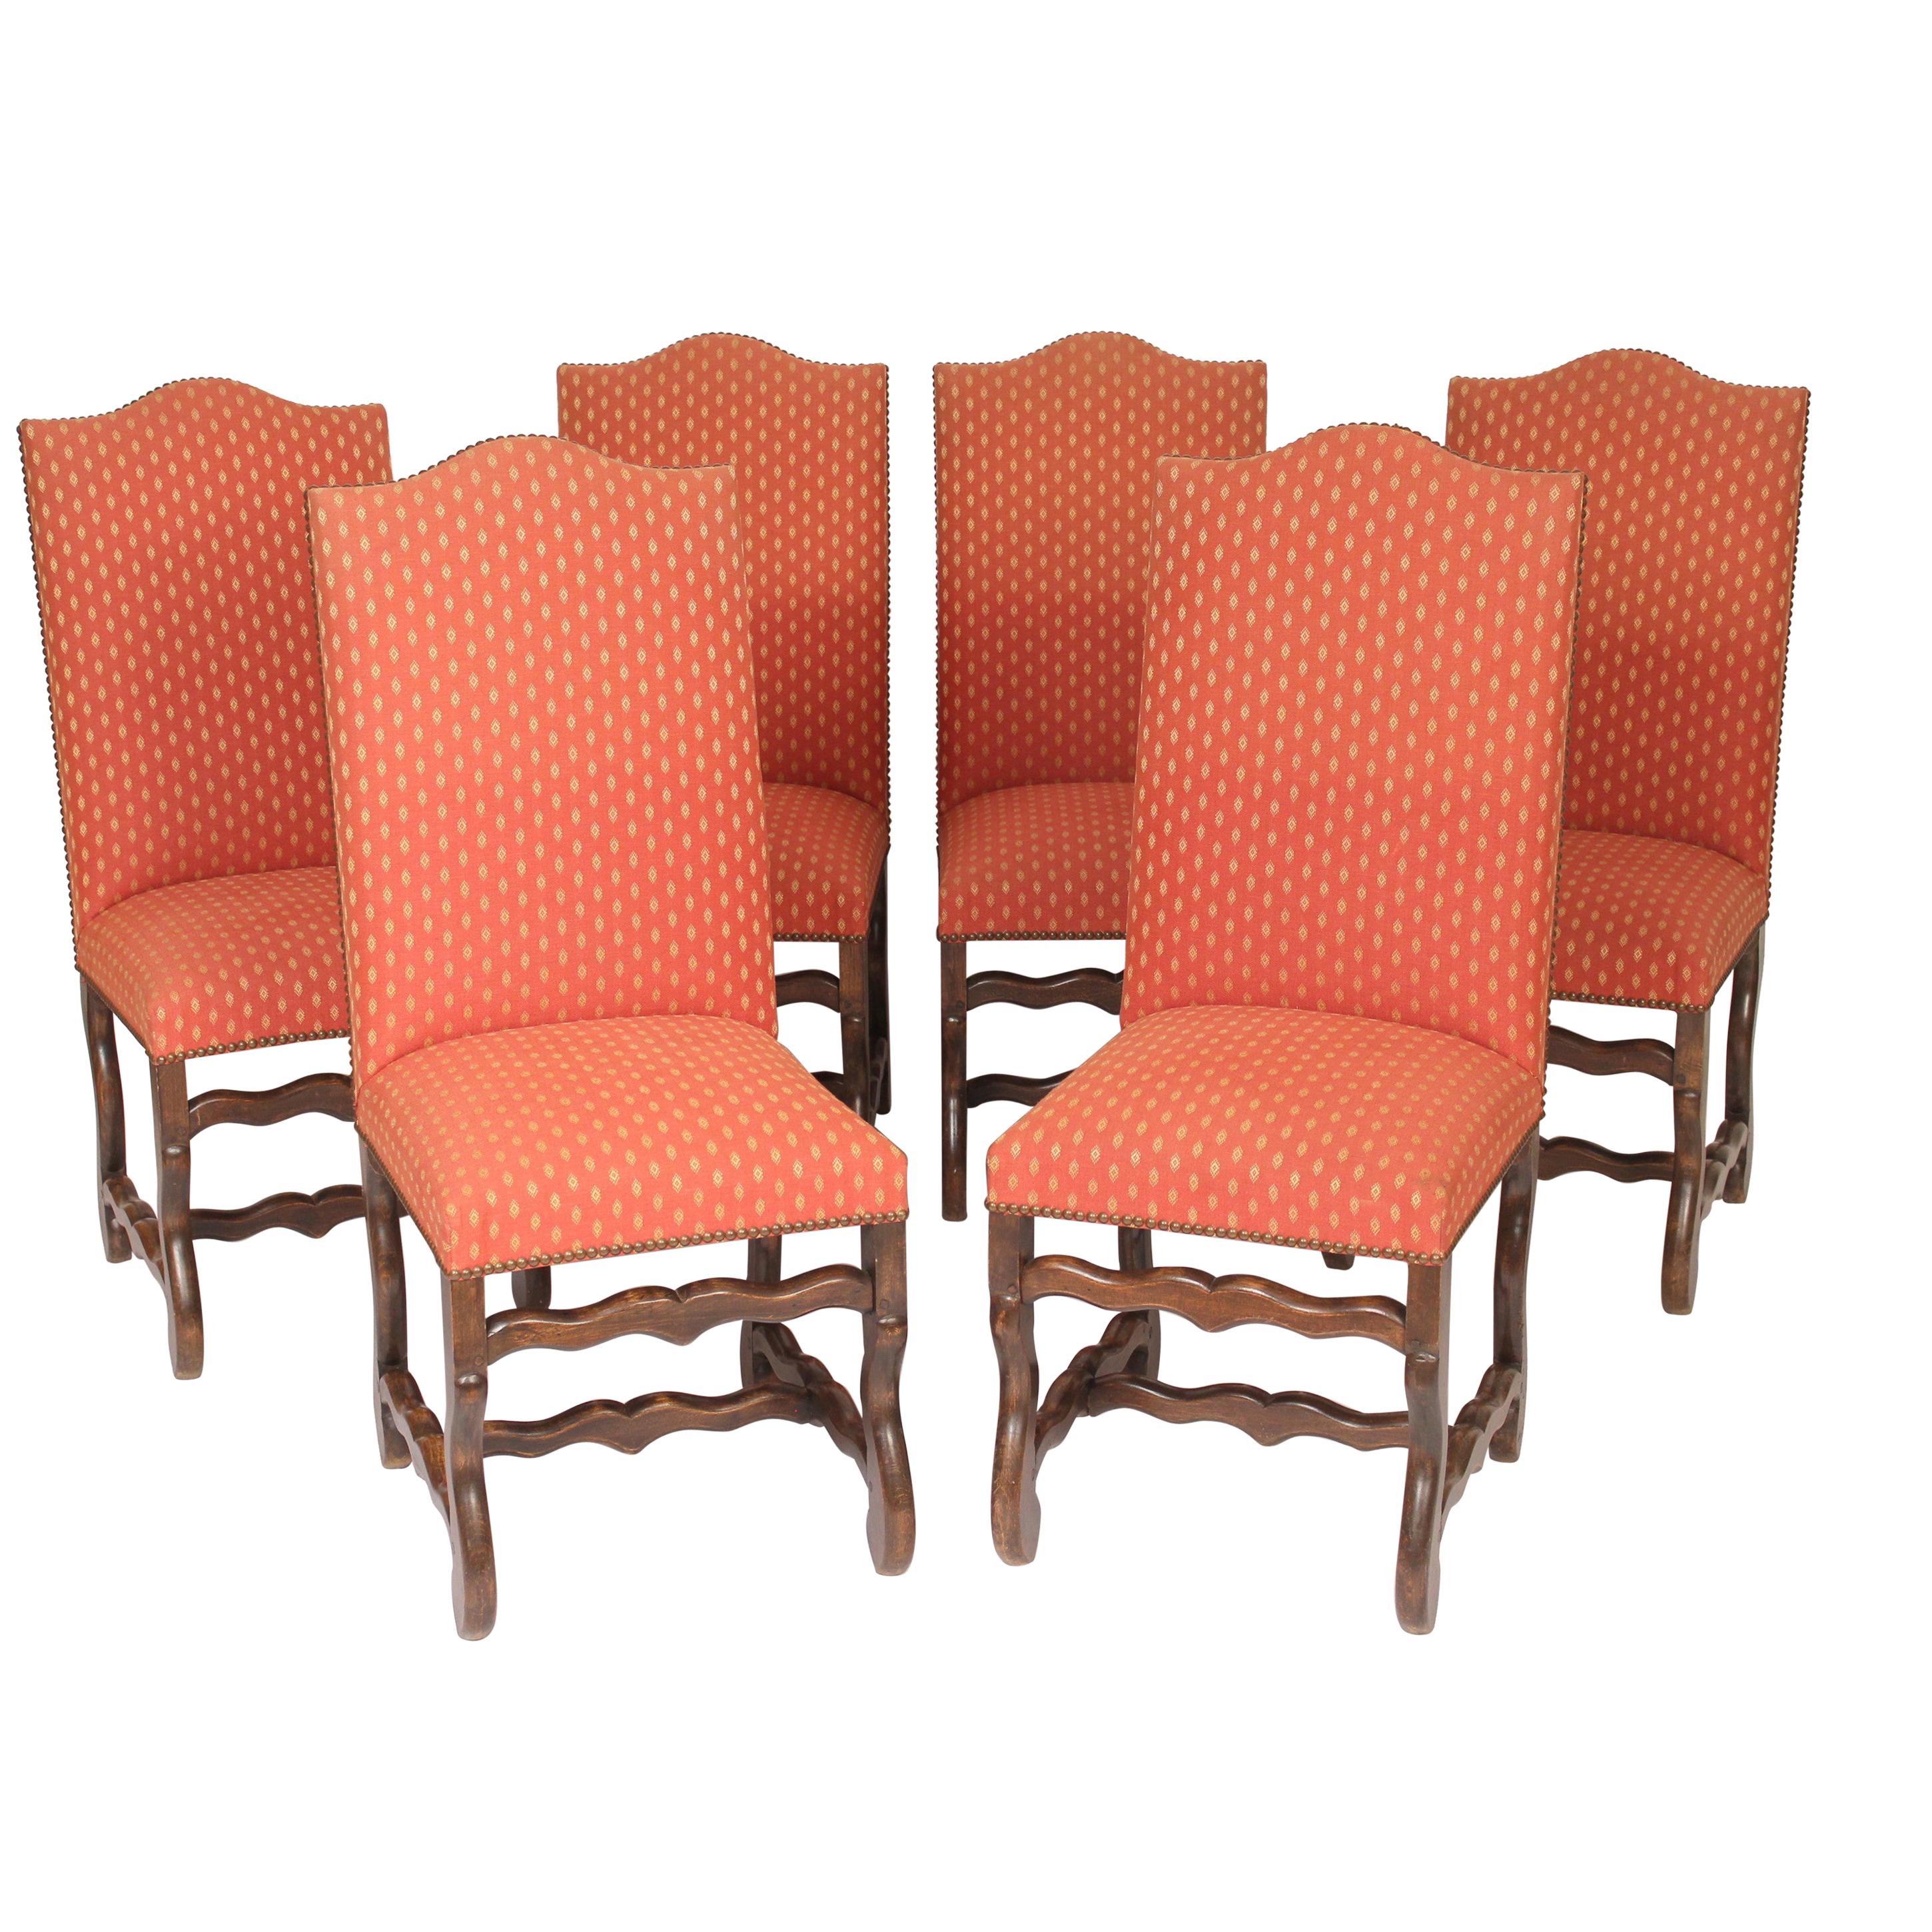 Set of 6 Louis XIV Style Dining Room Chairs